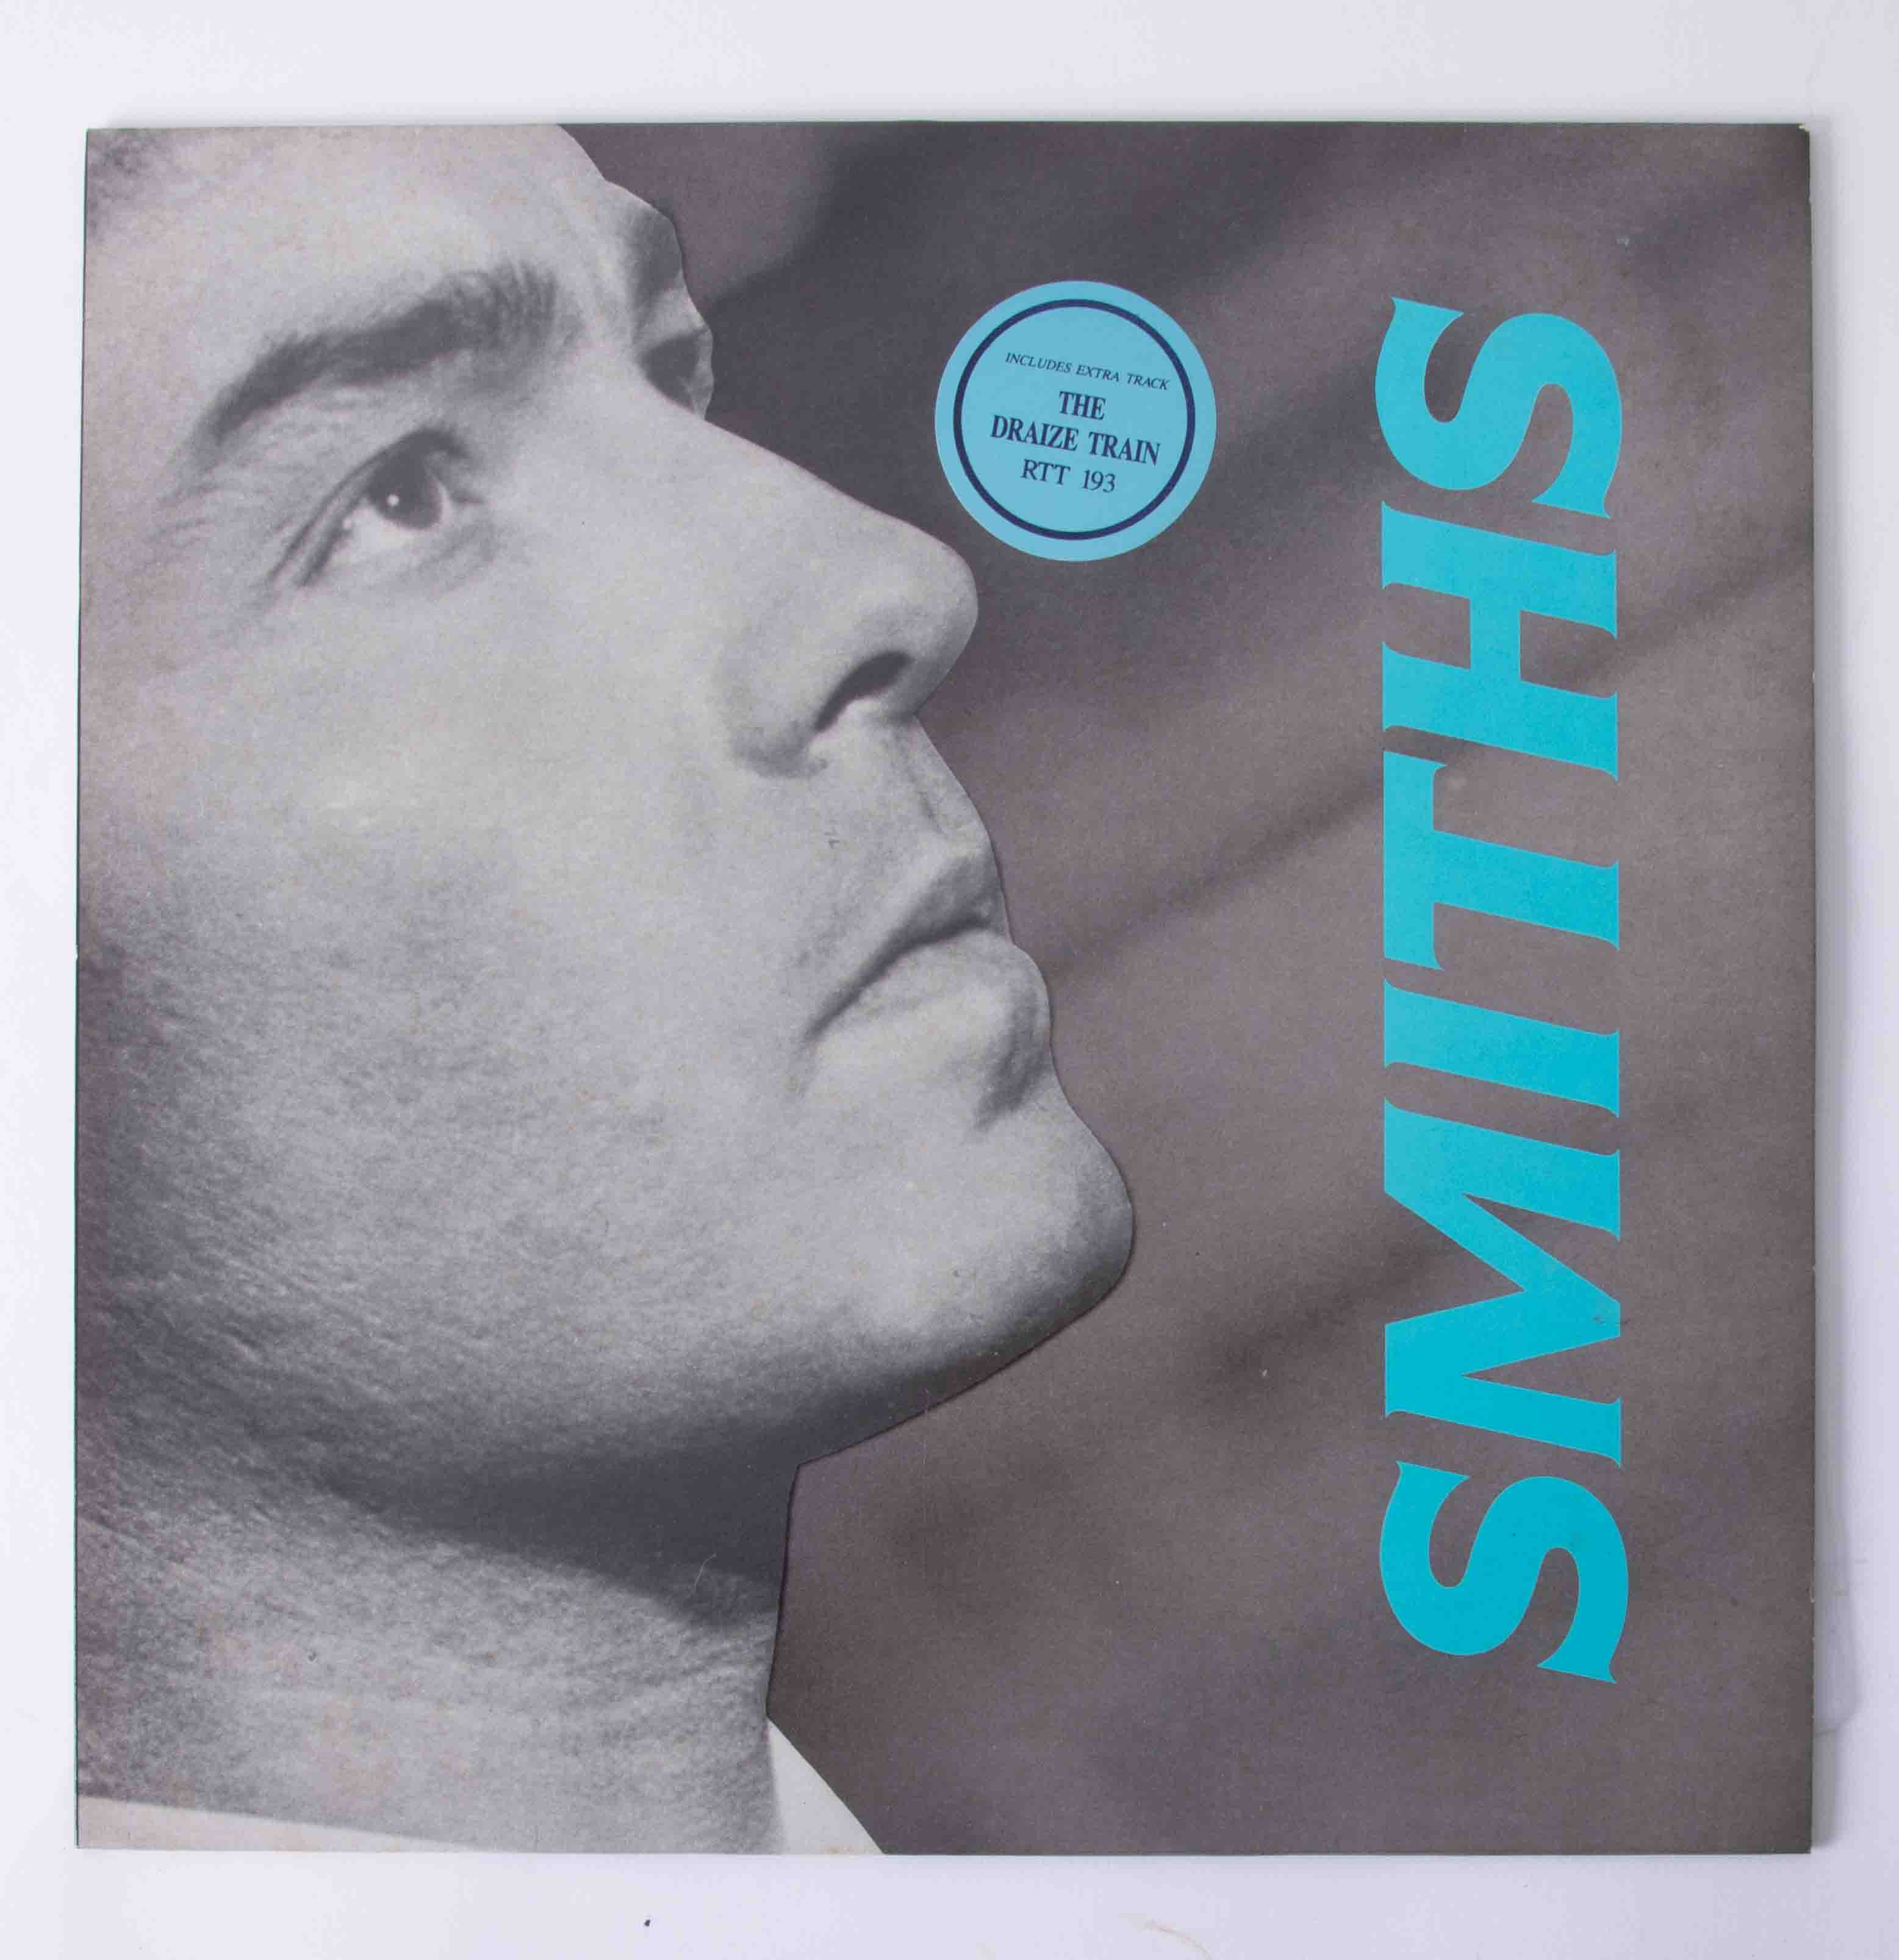 Vinyl 12 The Smiths 'Panic' 12 single 1986 RTT 193 rare first issue with complete set of stickers,